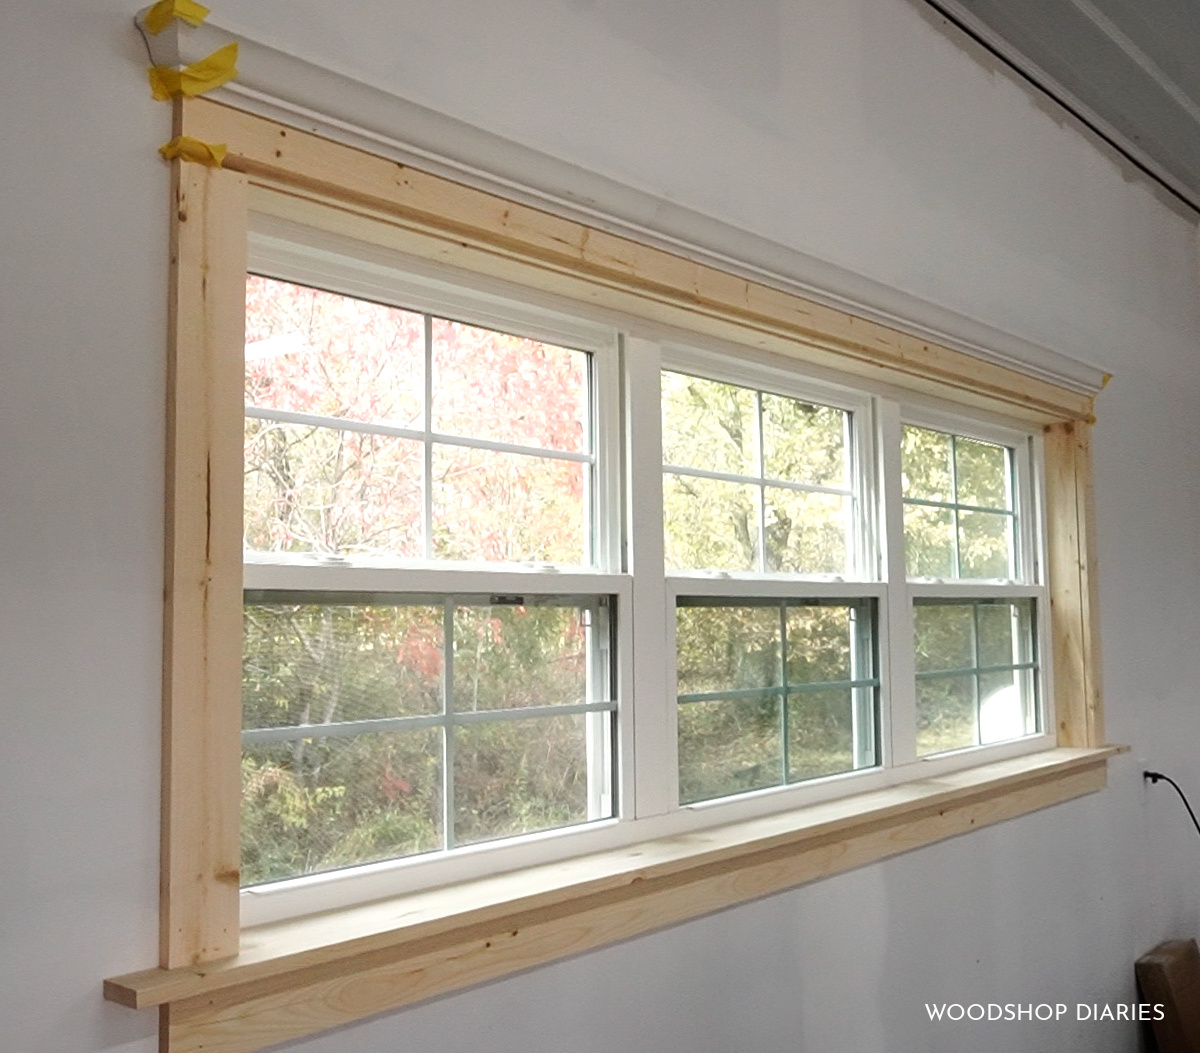 Unfinished DIY window trim installed on workshop window ready for paint